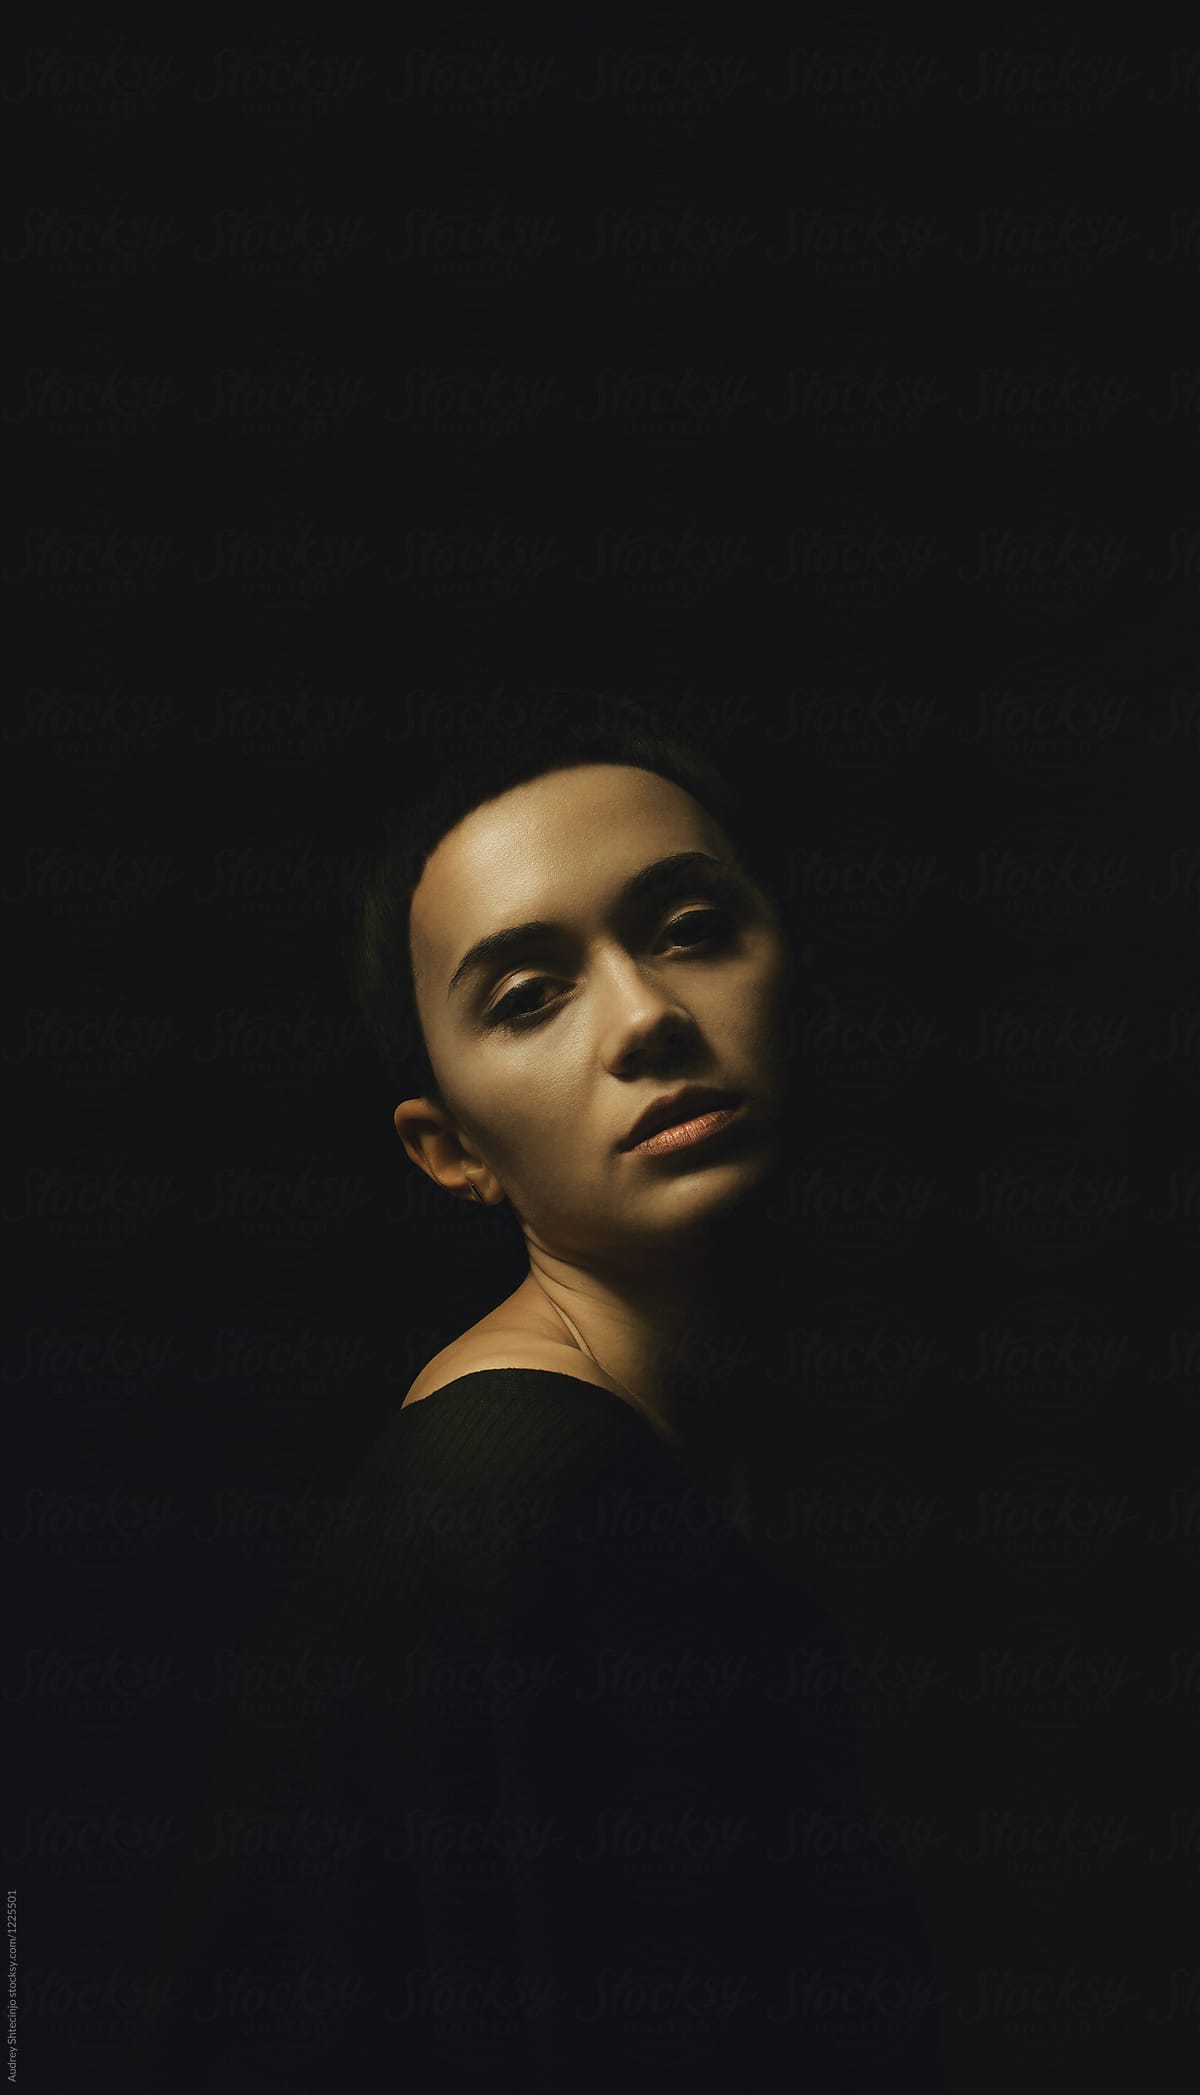 Dark/calm portrait of young woman with dark short hair